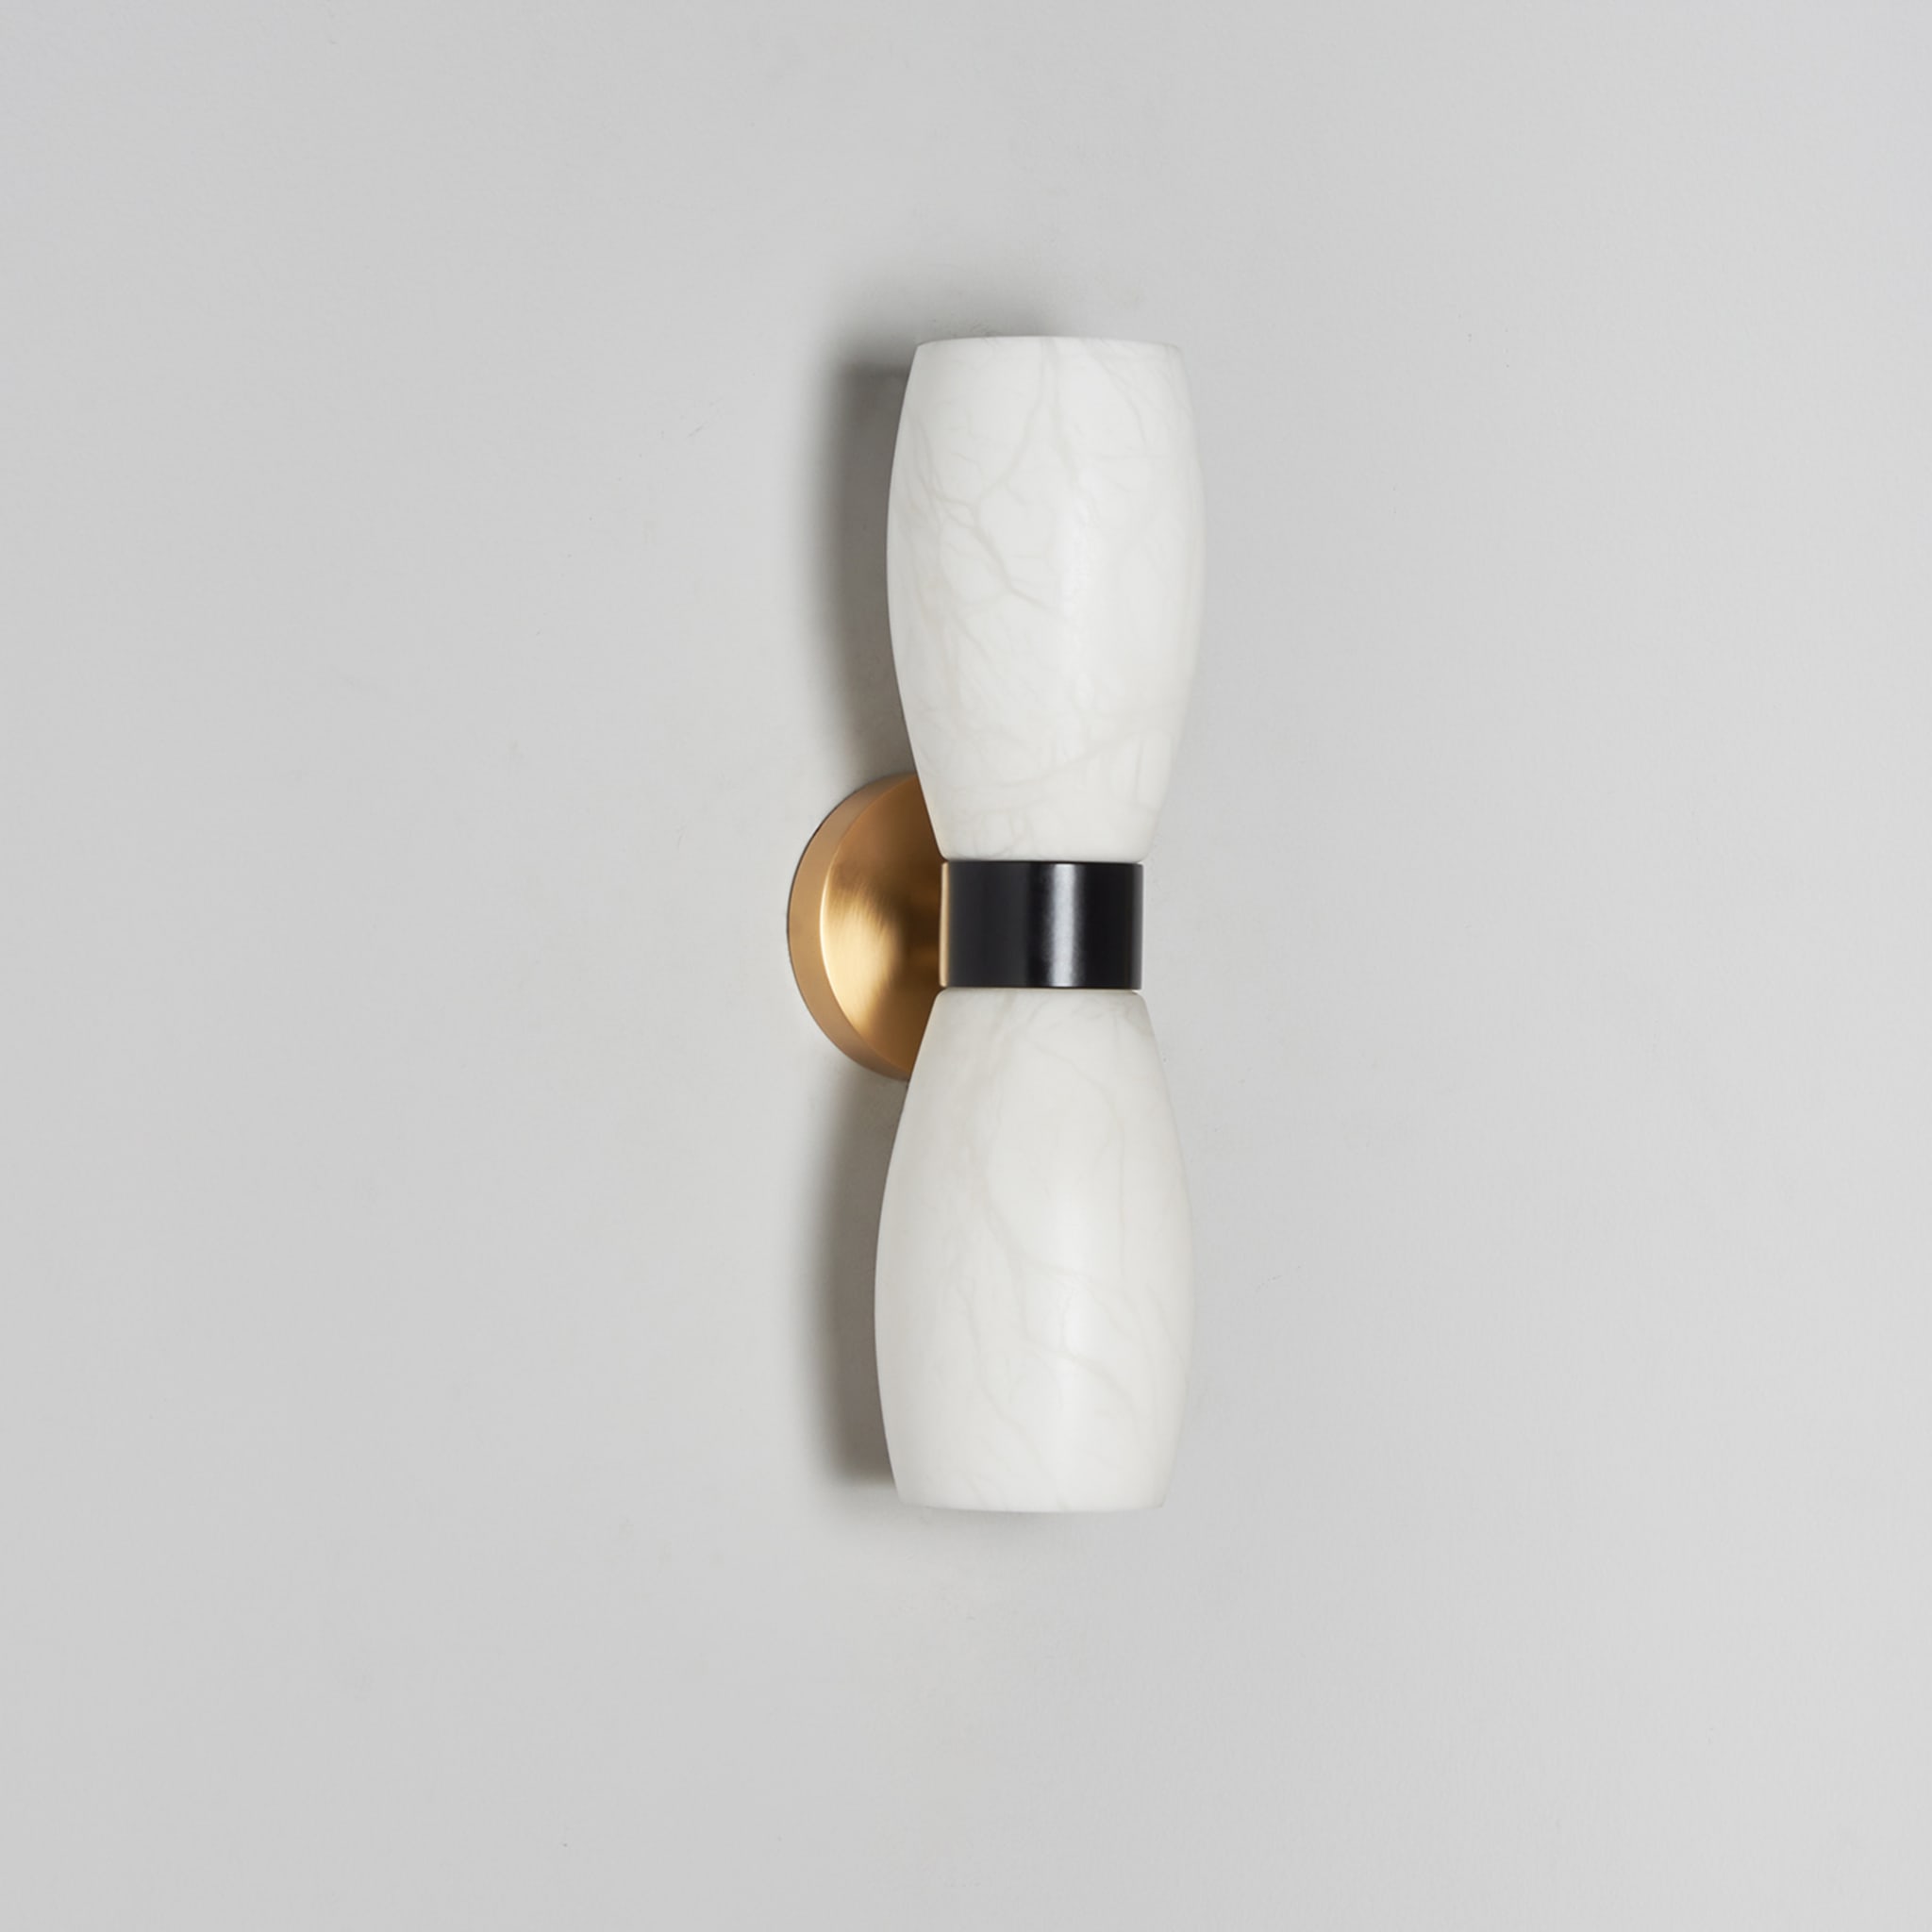 "Demetra" Wall Sconce in Satin French Gold, Mat Balck and Alabaster - Alternative view 2